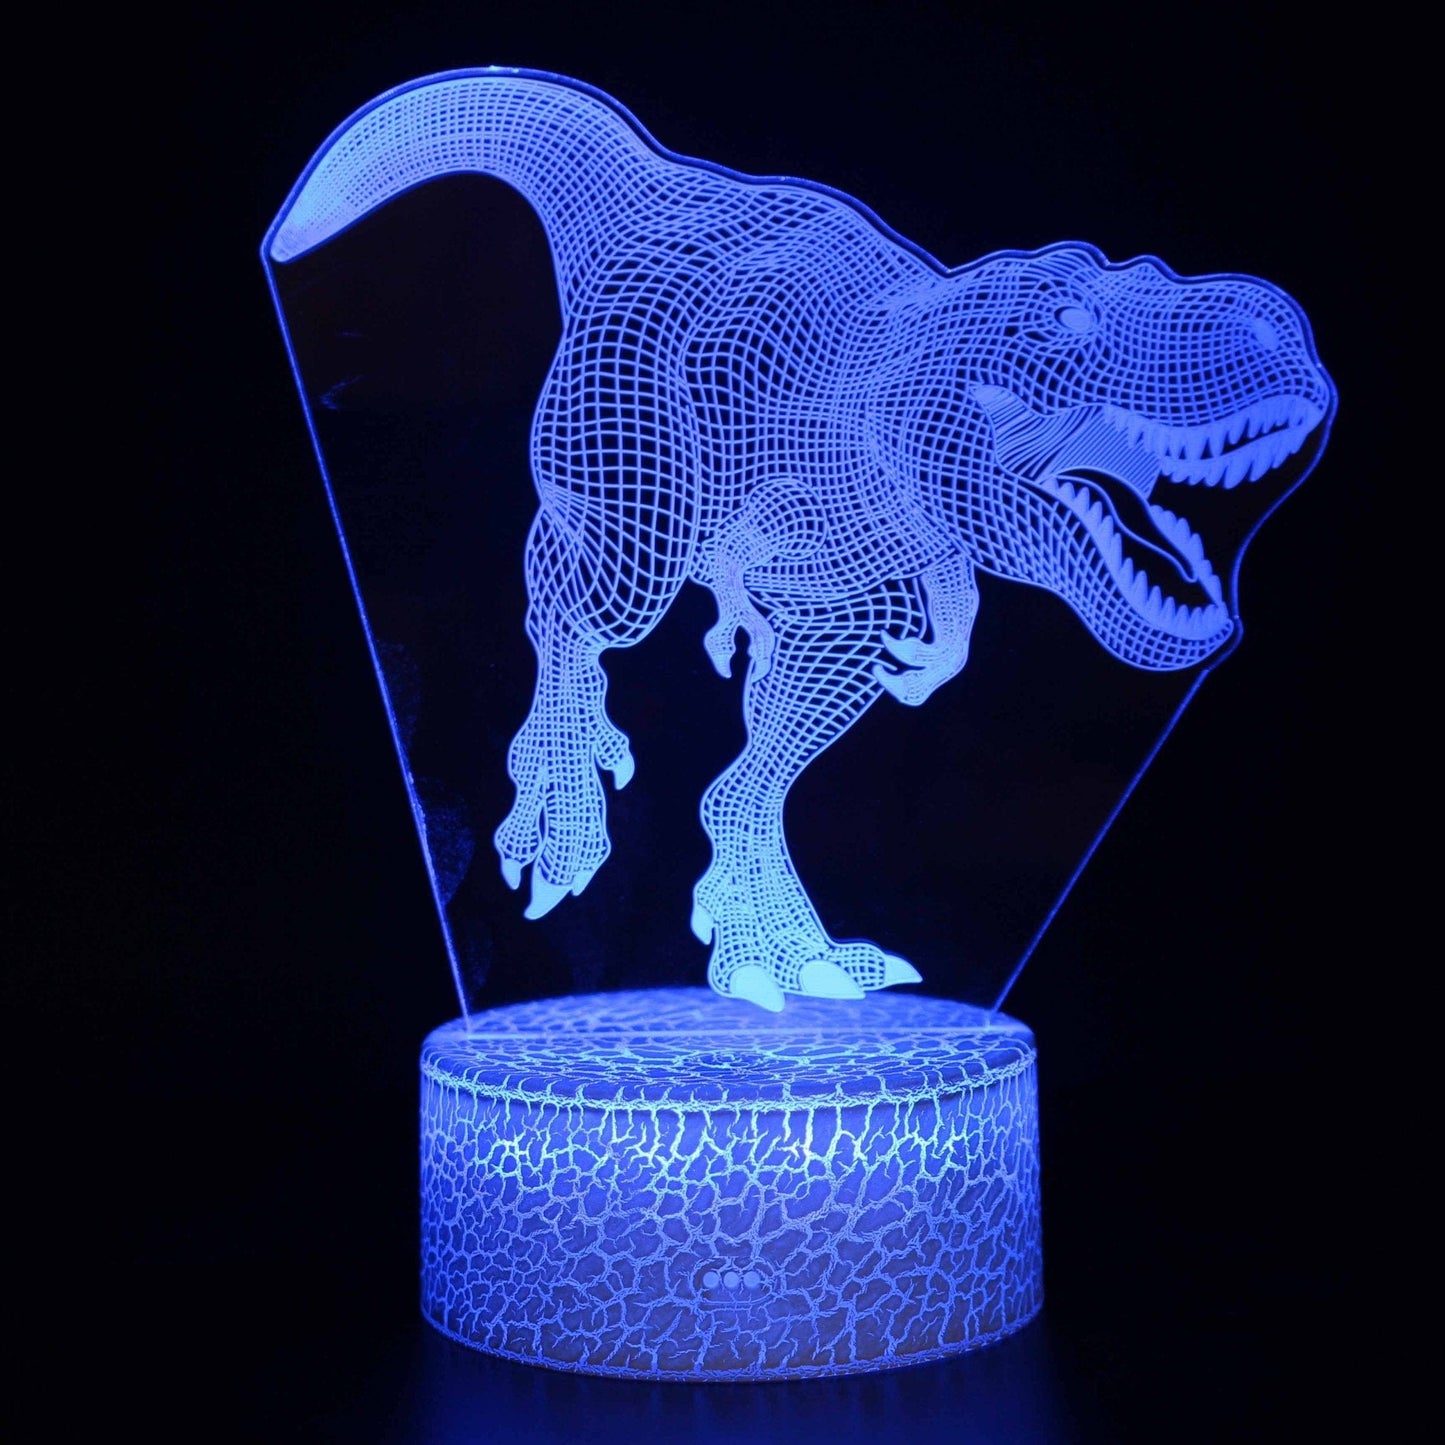 Dinosaur Series 3D Table Lamp LED Colorful Touch Remote Control Gift Nightlight - CLASSY CLOSET BOUTIQUEDinosaur Series 3D Table Lamp LED Colorful Touch Remote Control Gift NightlighteperloF37B4482CE694D40936D7E927563E80AKX-10877 Colors No Remote